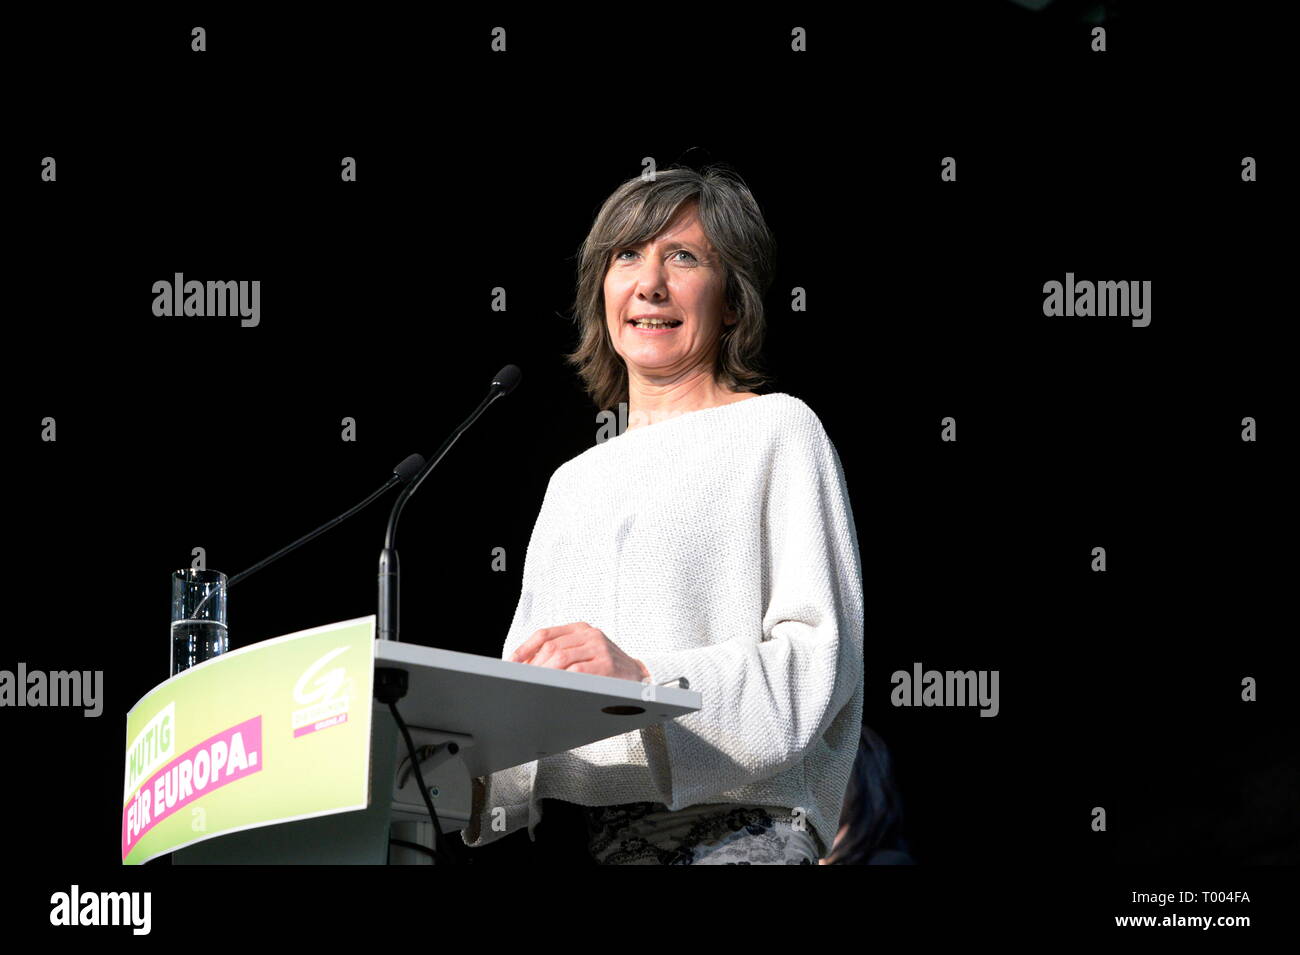 Vienna, Austria. 16 March 2019. Invitation to the 40th Federal Congress of the Greens: Under the motto "Courageous for Europe", seats 1 to 6 in the Expedithalle in Vienna will be on the list of candidates for election to the European Parliament. Picture shows Birgit Hebein.  Credit: Franz Perc / Alamy Live News Stock Photo